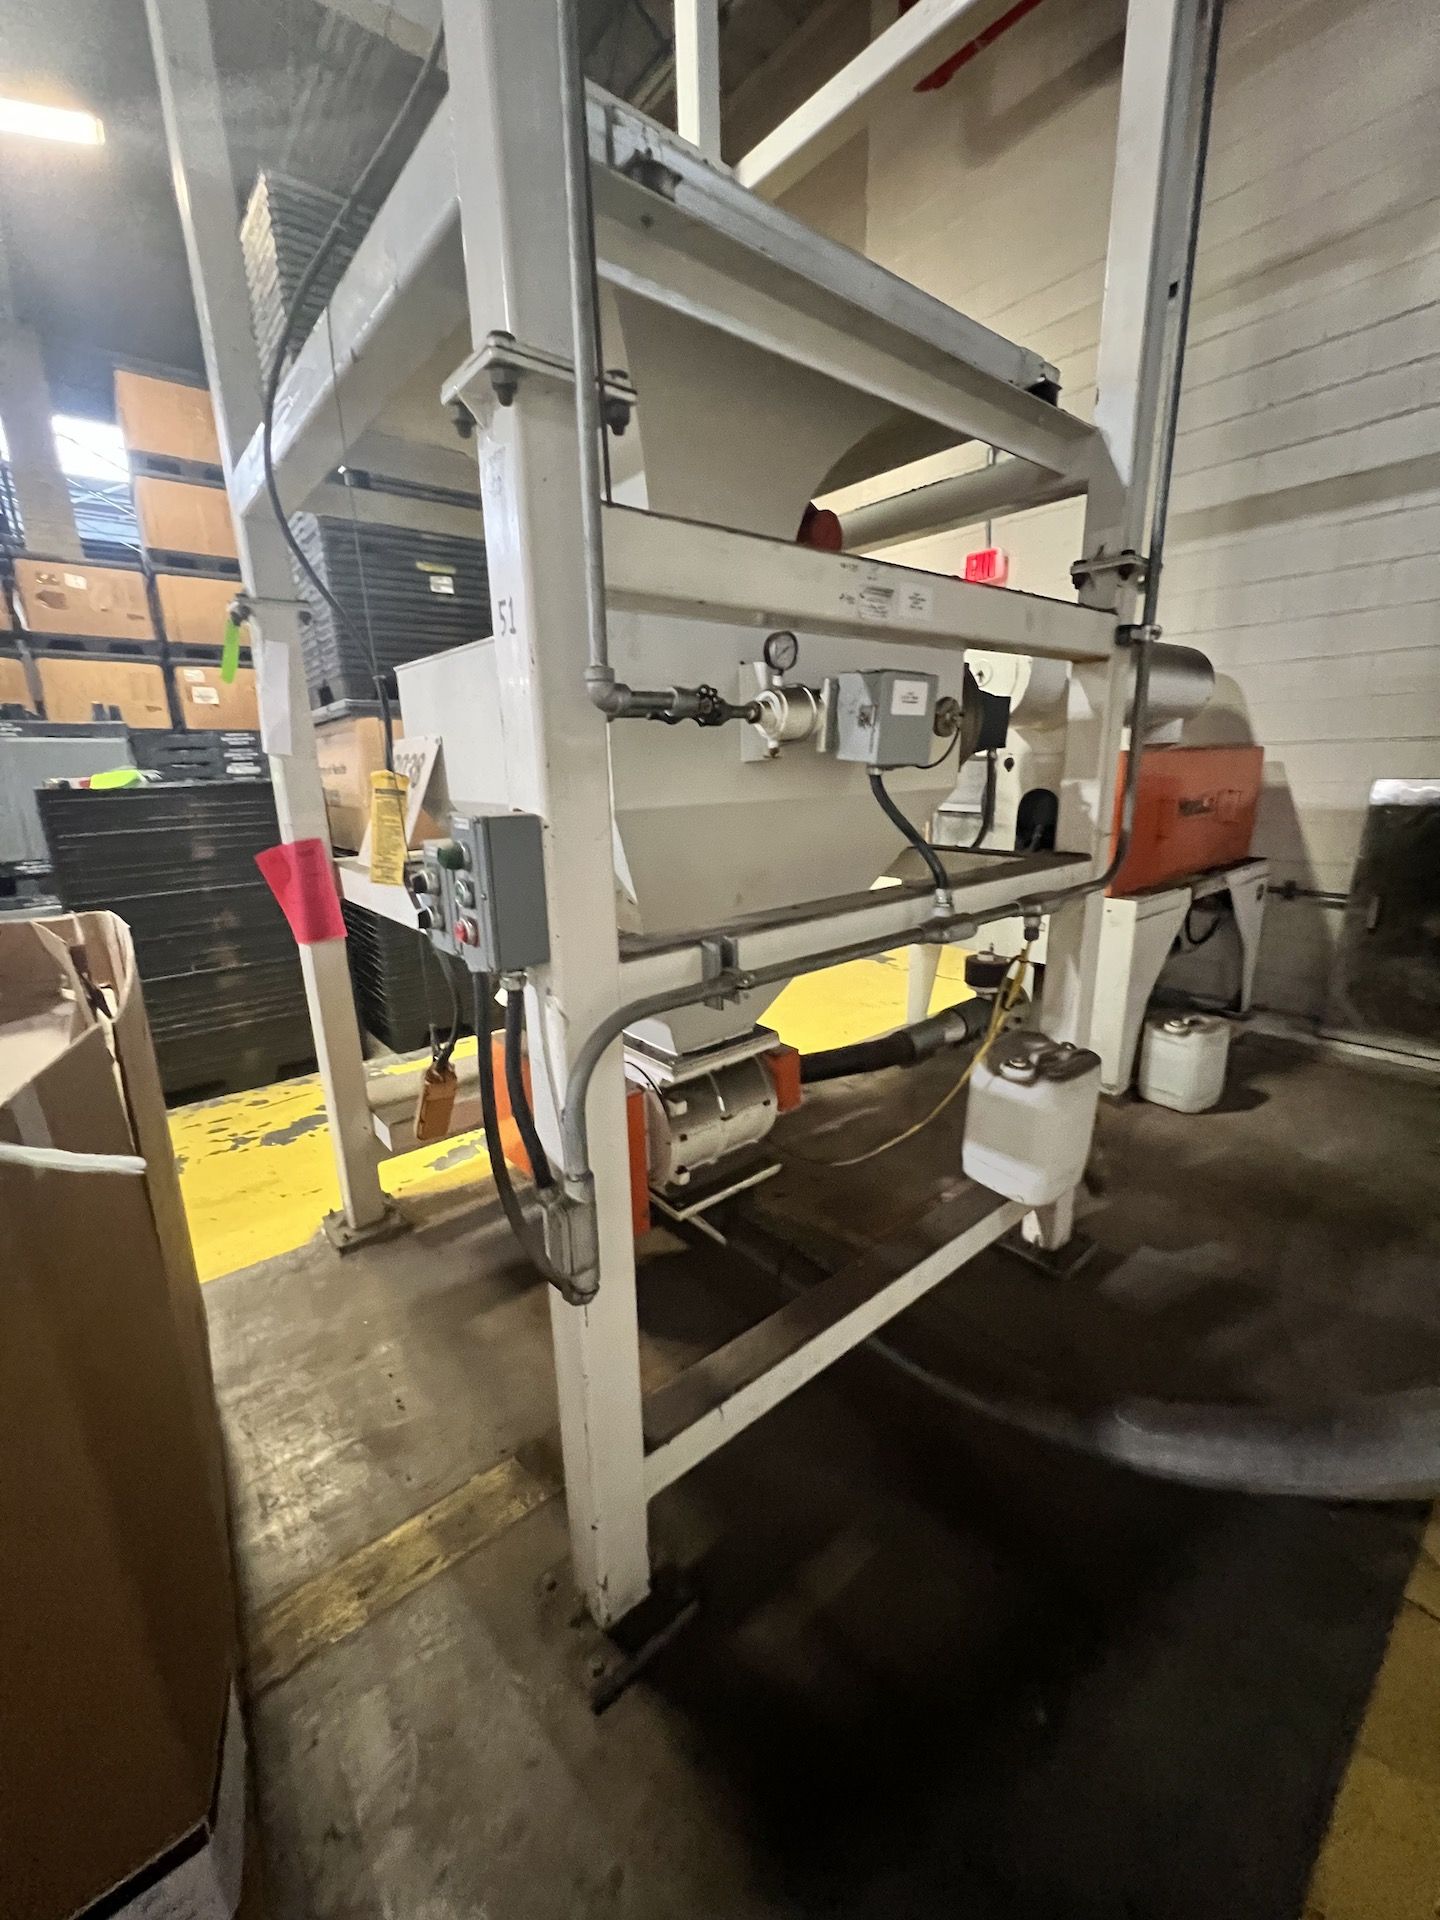 HORIZON SYSTEMS BULK BAG DISCHARGER / SUPERSAC UNLOADING SYSTEM, INCLUDES ROTARY AIRLOCK VALVE, - Image 13 of 24